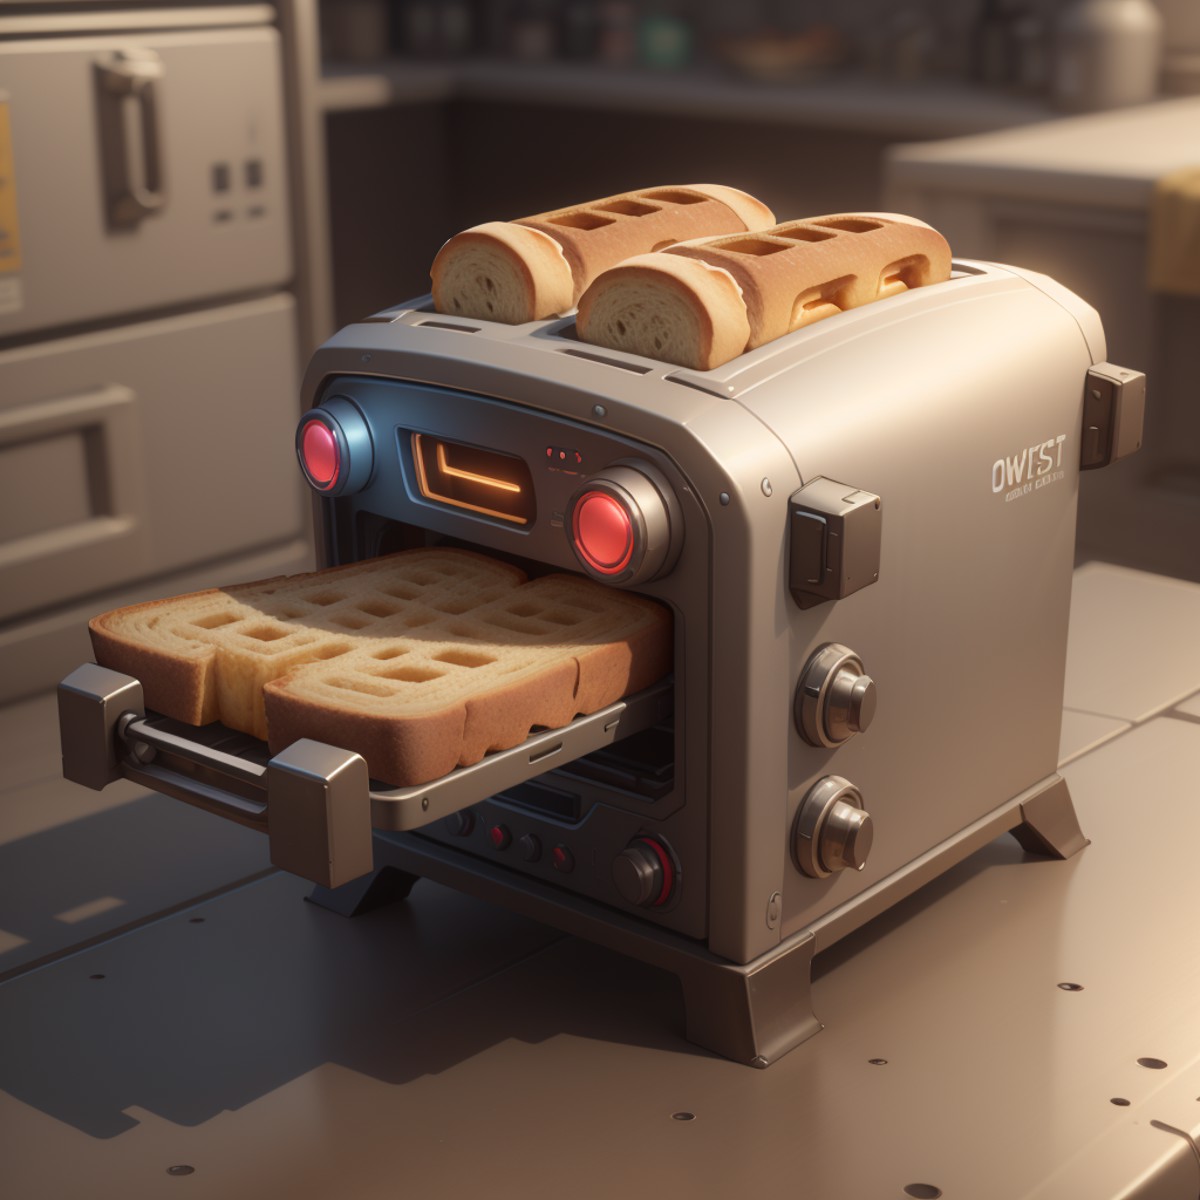 04664-307195937-,owtech,scifi, stylized 3d, _toaster, bread,.png